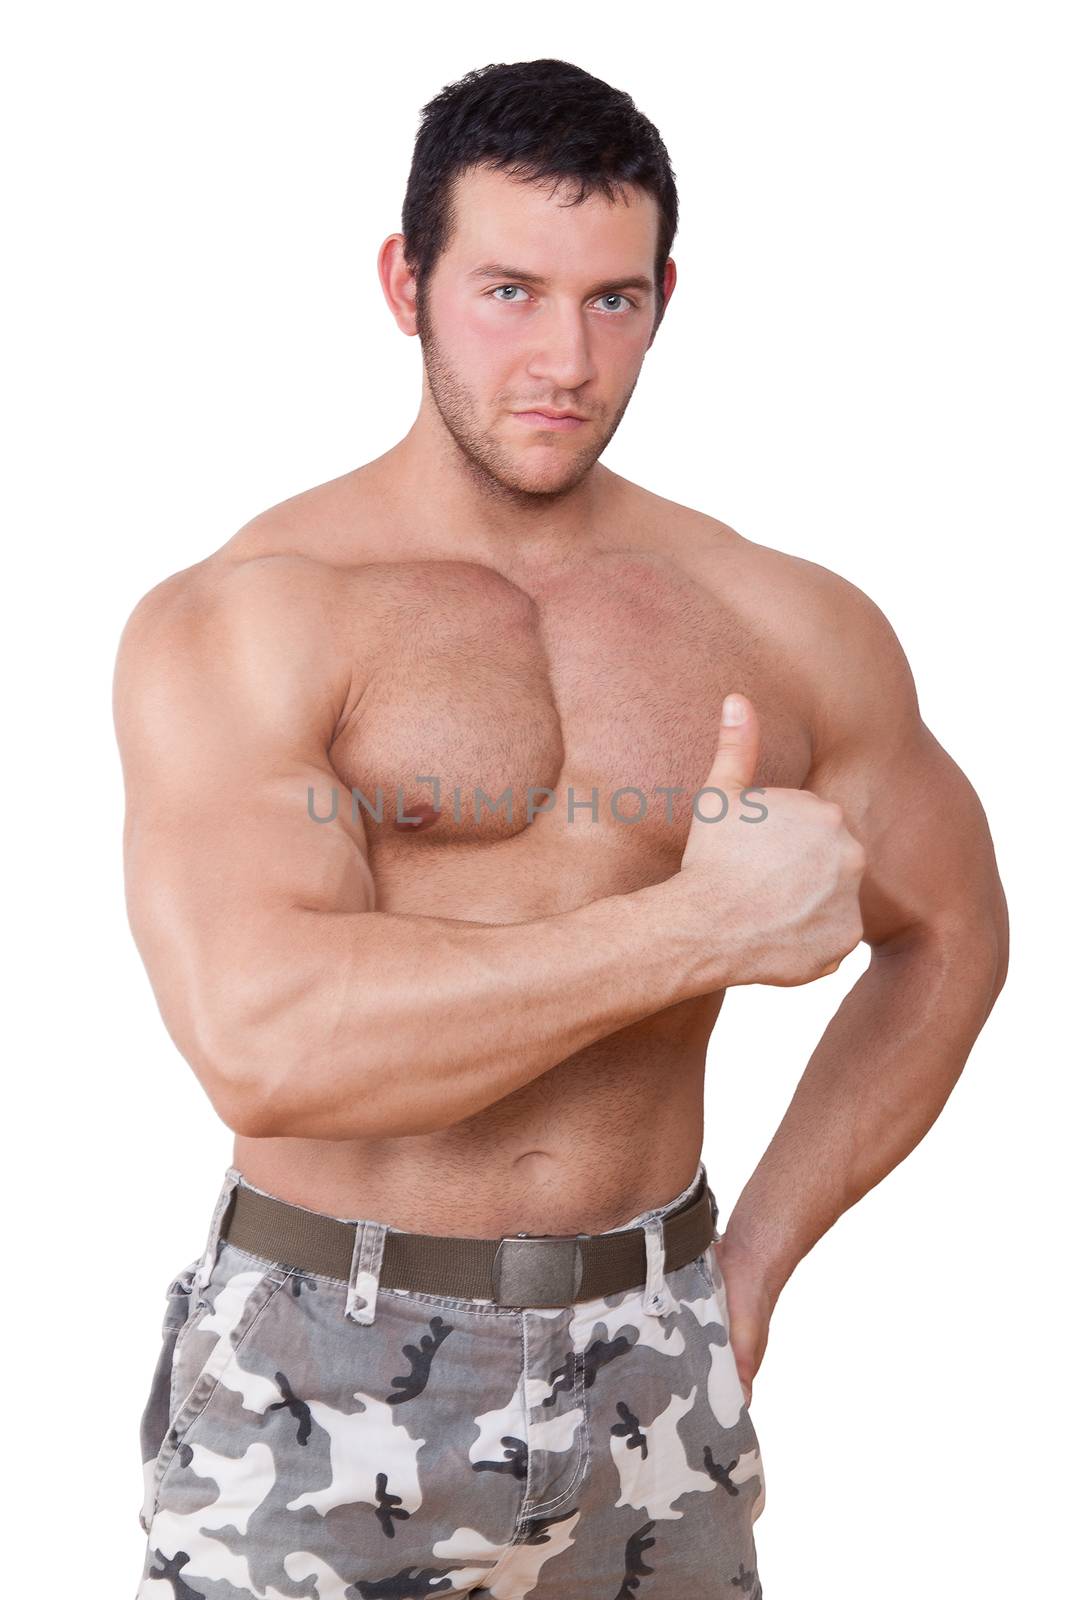 Sexy shirtless muscular man showing thumbs up isolated on white background. Sport and fitness concept.